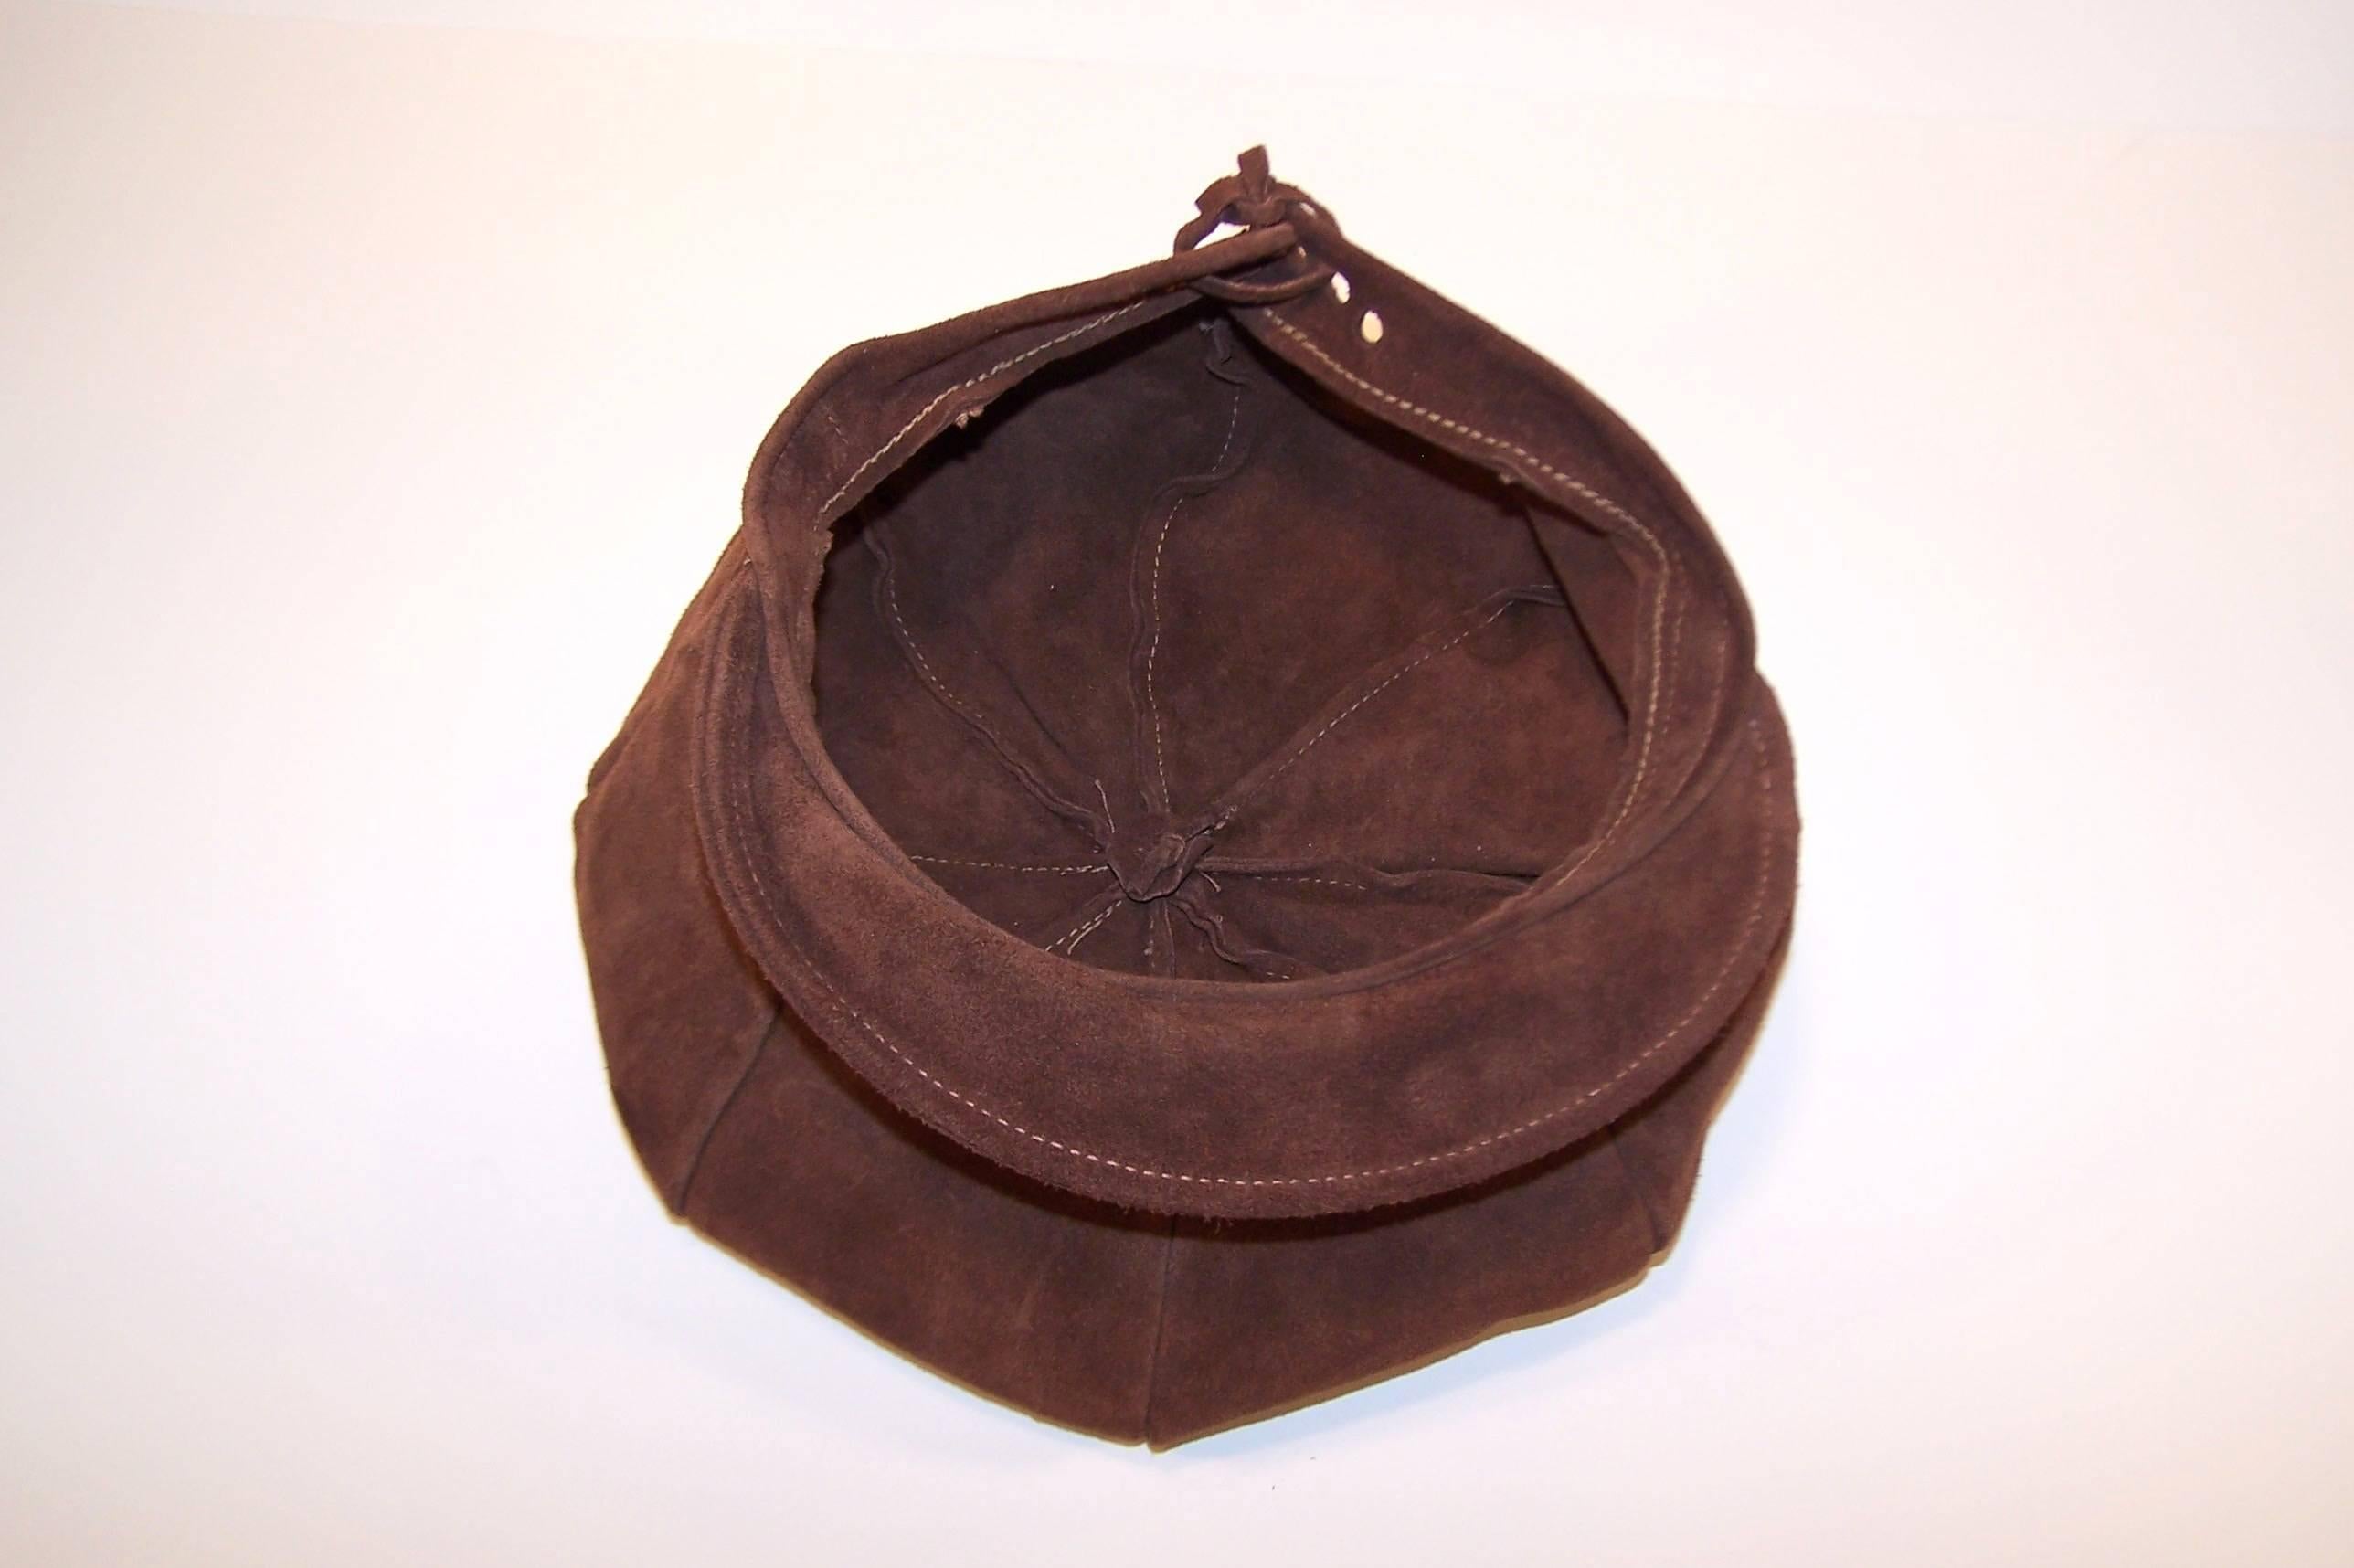 EXTRA! EXTRA! C.1970 Newsboy Style Brown Suede Boho Hat 2